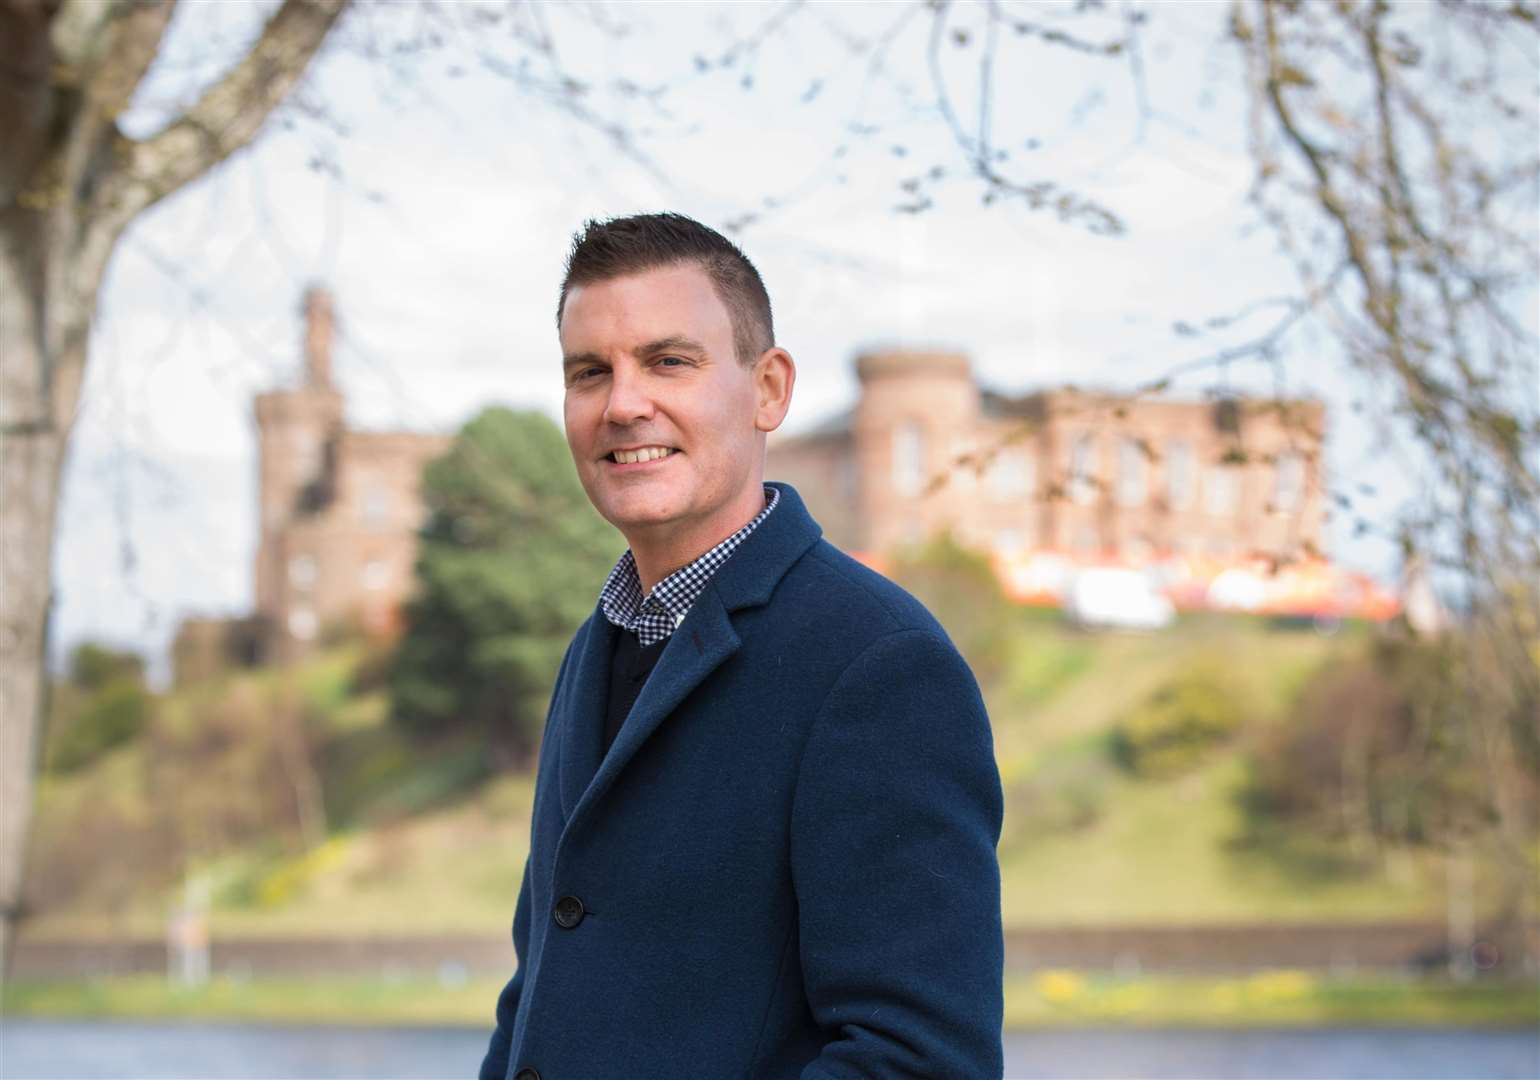 Cru holdings director Scott Murray has launched the Inverness City Alliance to represent local voices.